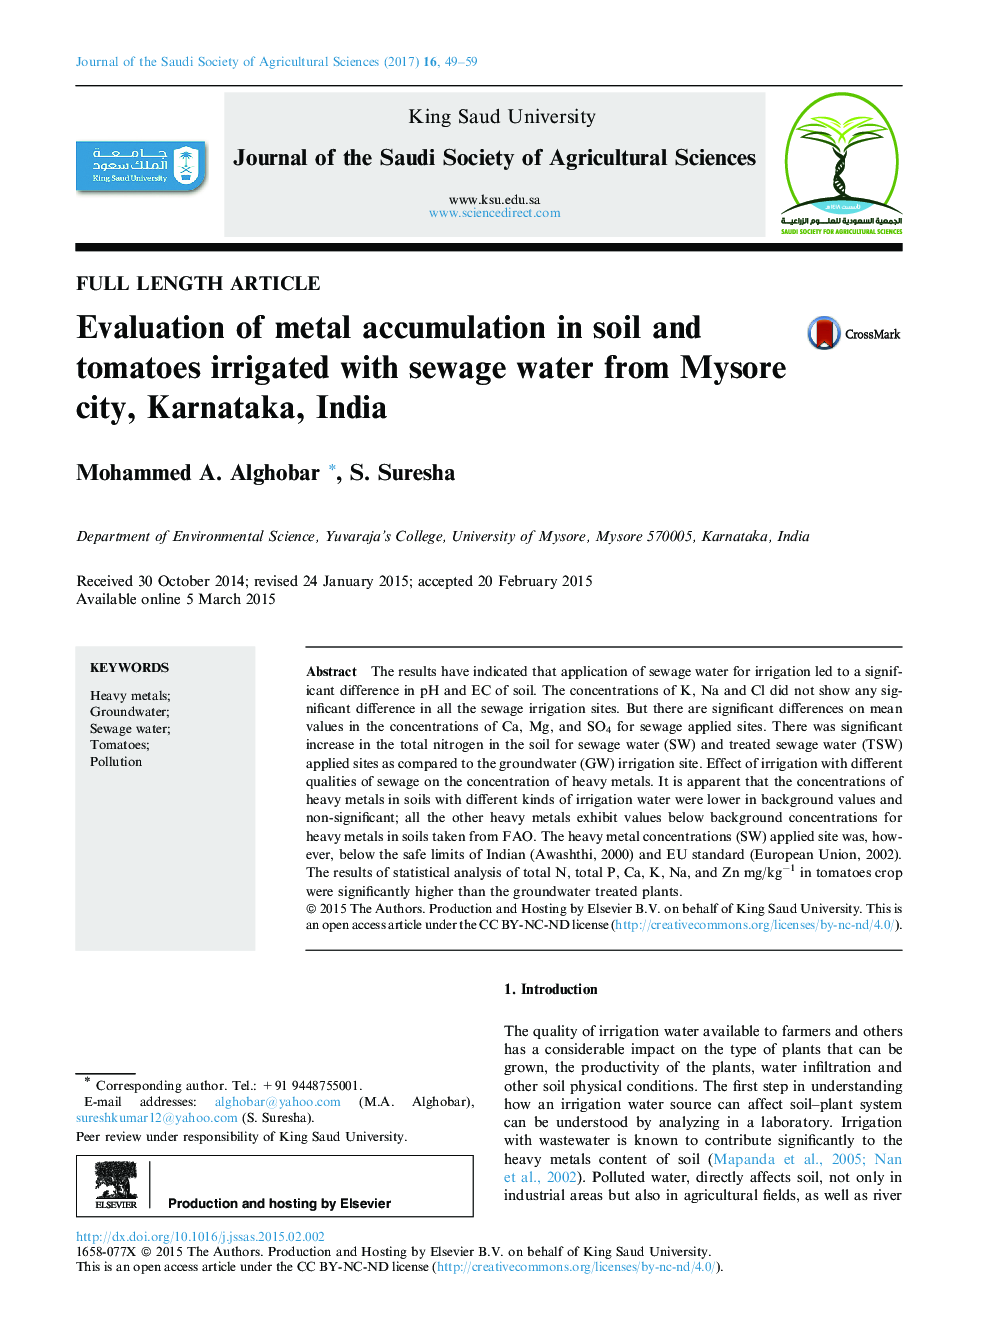 Evaluation of metal accumulation in soil and tomatoes irrigated with sewage water from Mysore city, Karnataka, India